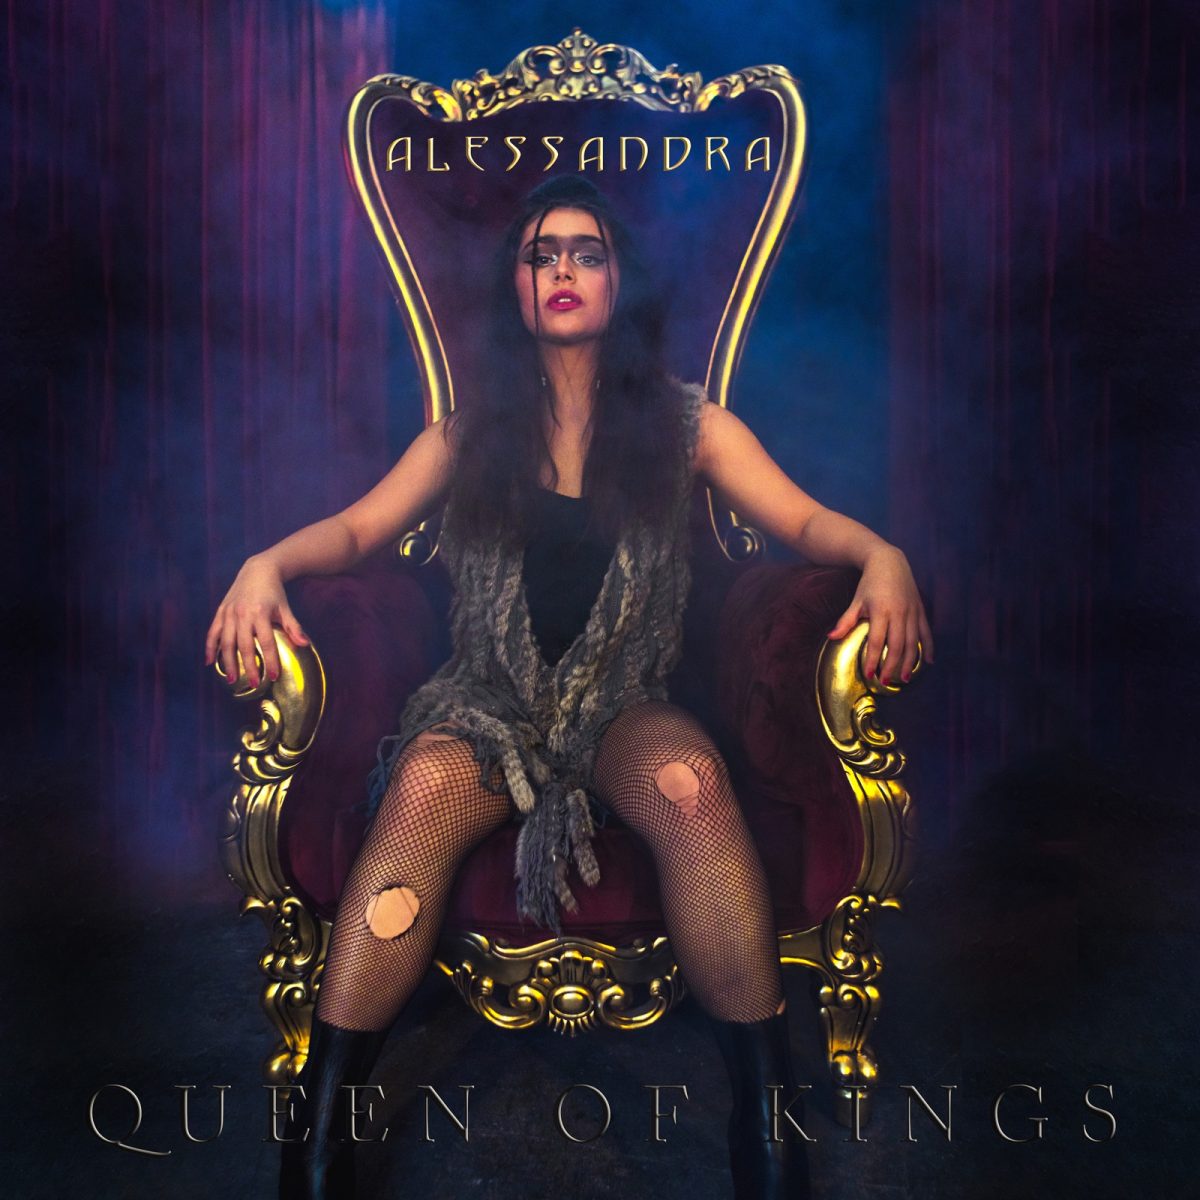 Download 058. Alessandra - Queen of Kings.mp3 | remix search engine [v2]